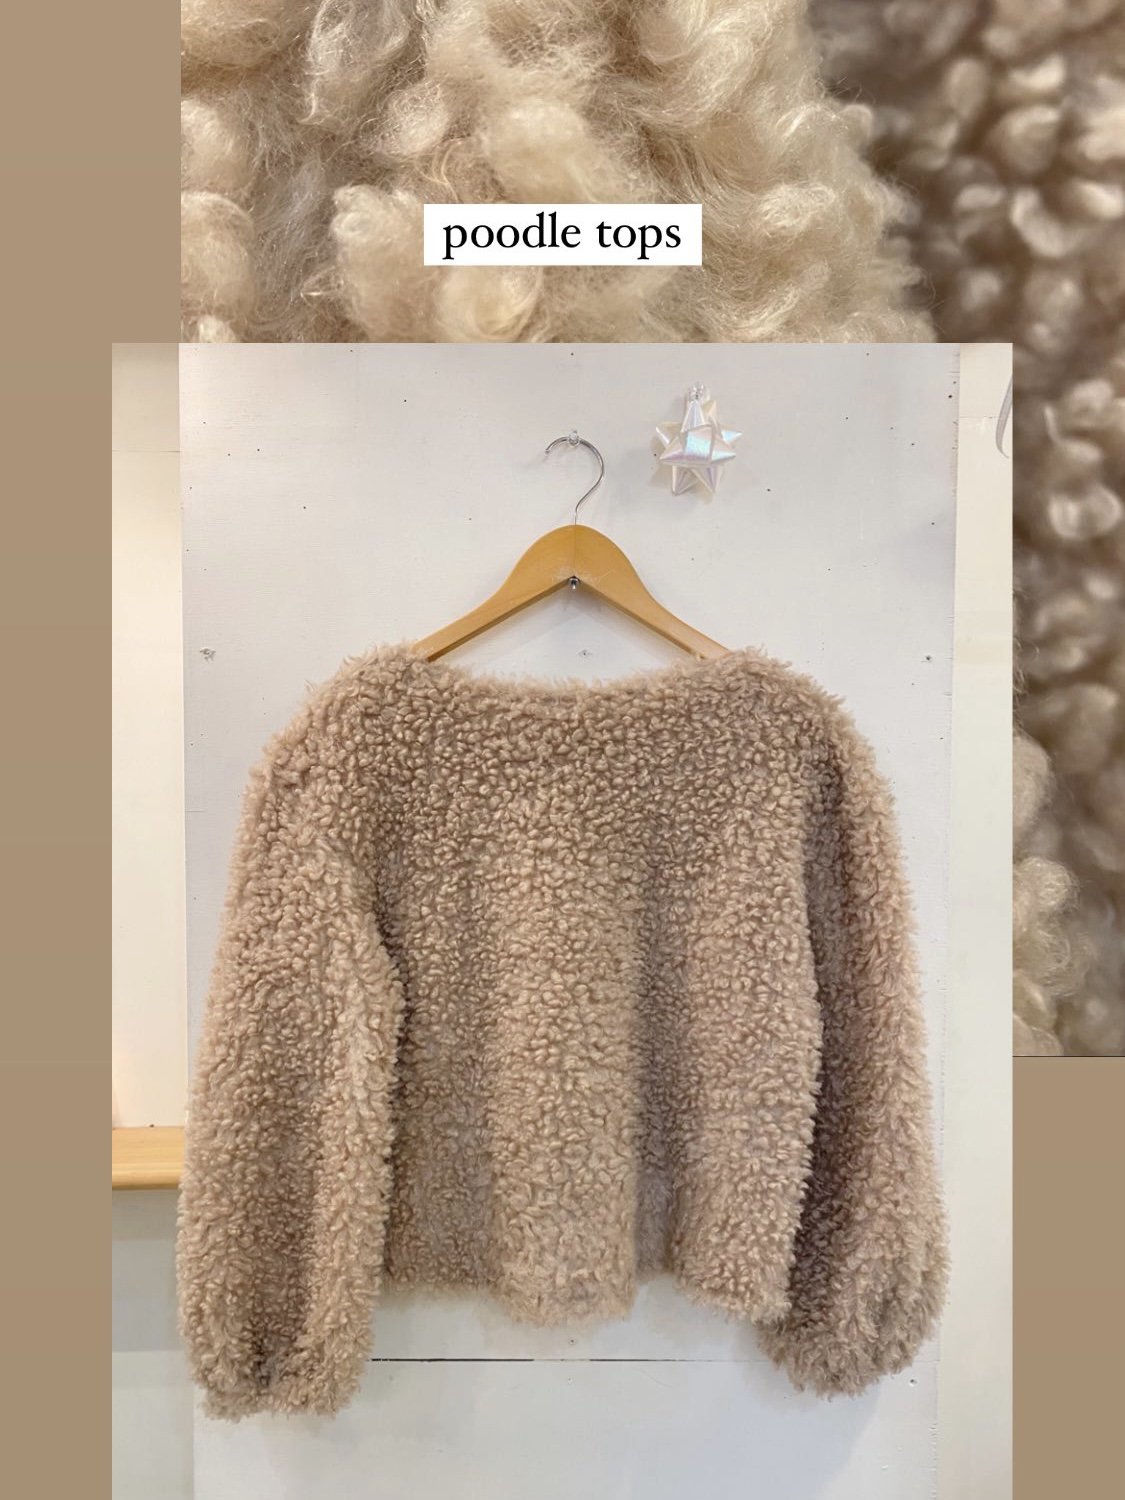 poodle tops